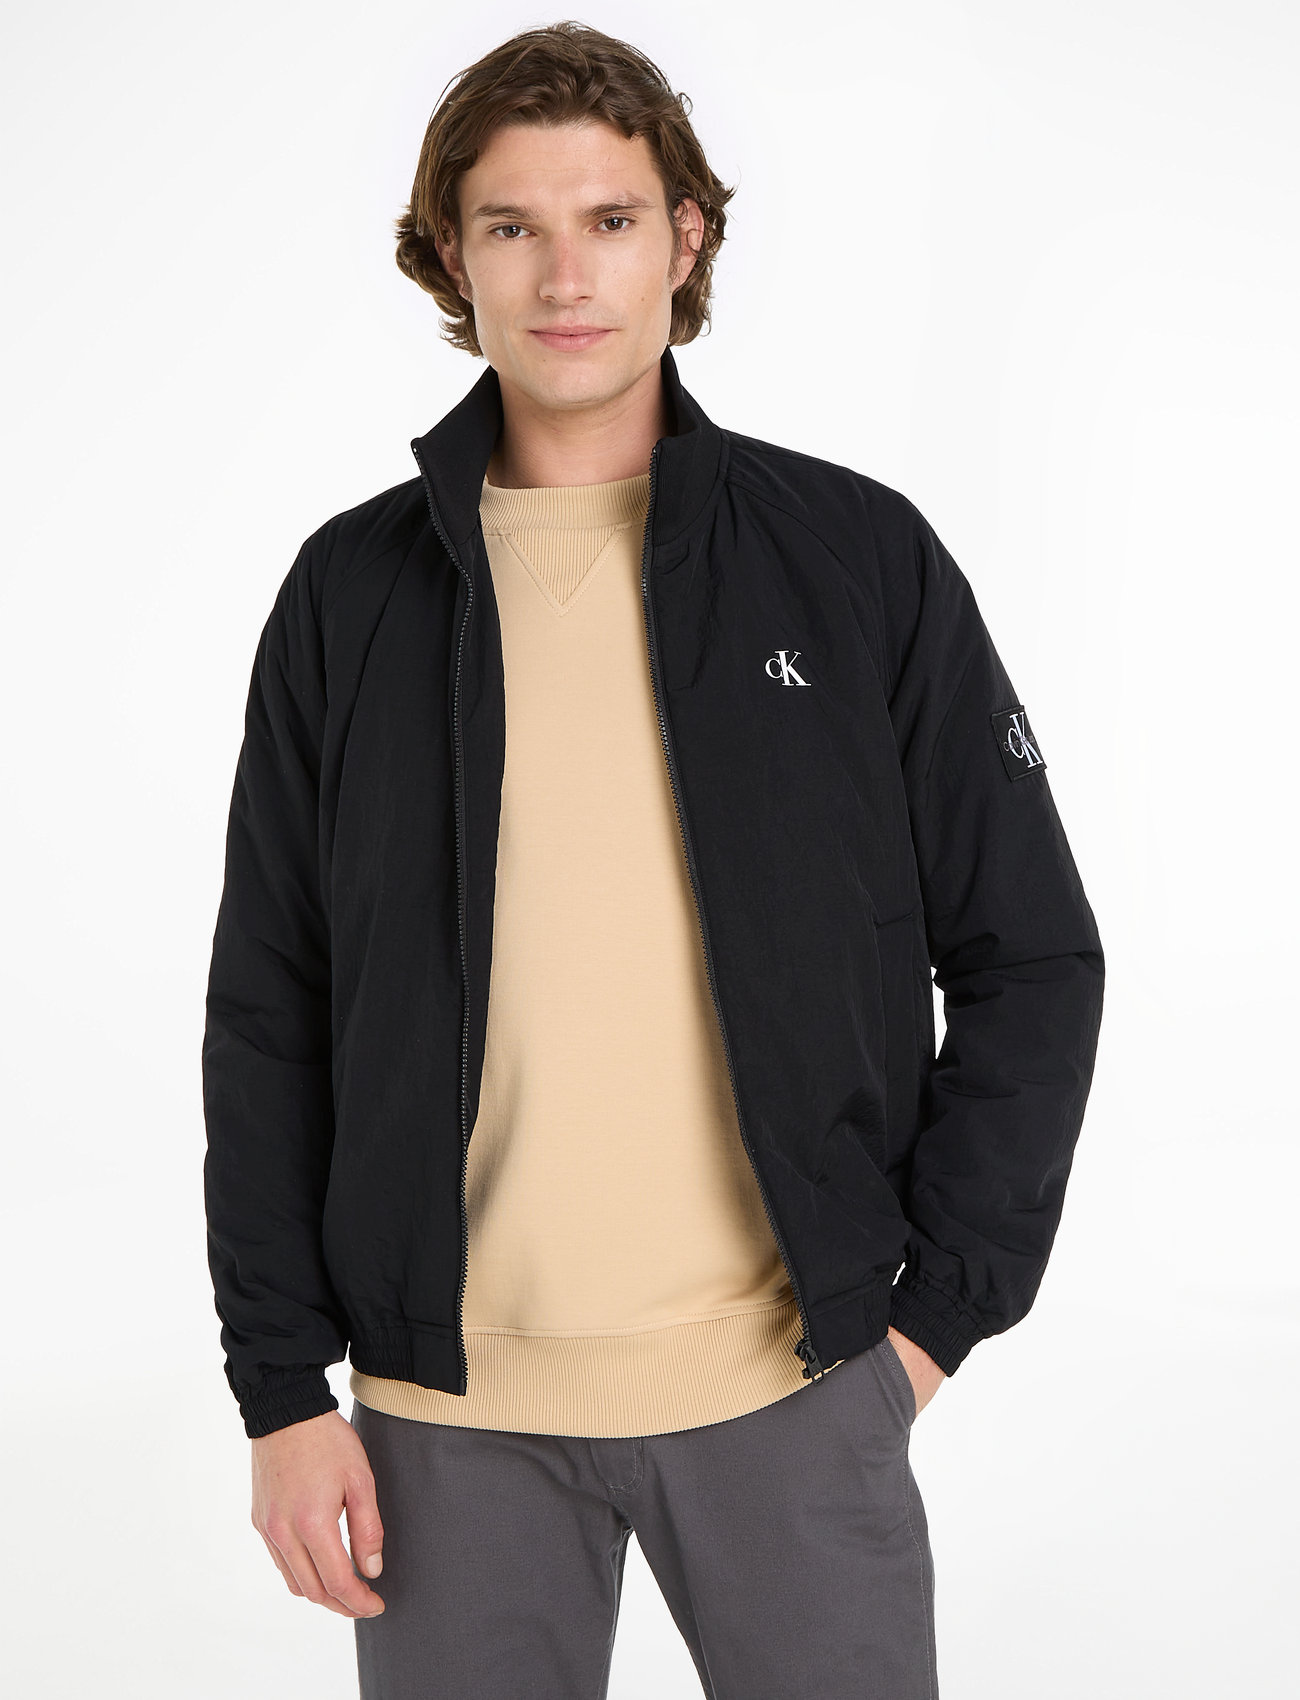 Calvin Klein Jeans Klein delivery Fast from Jeans Padded Light Buy 127.42 at - Boozt.com. online Calvin Jackets €. easy returns Harrington and